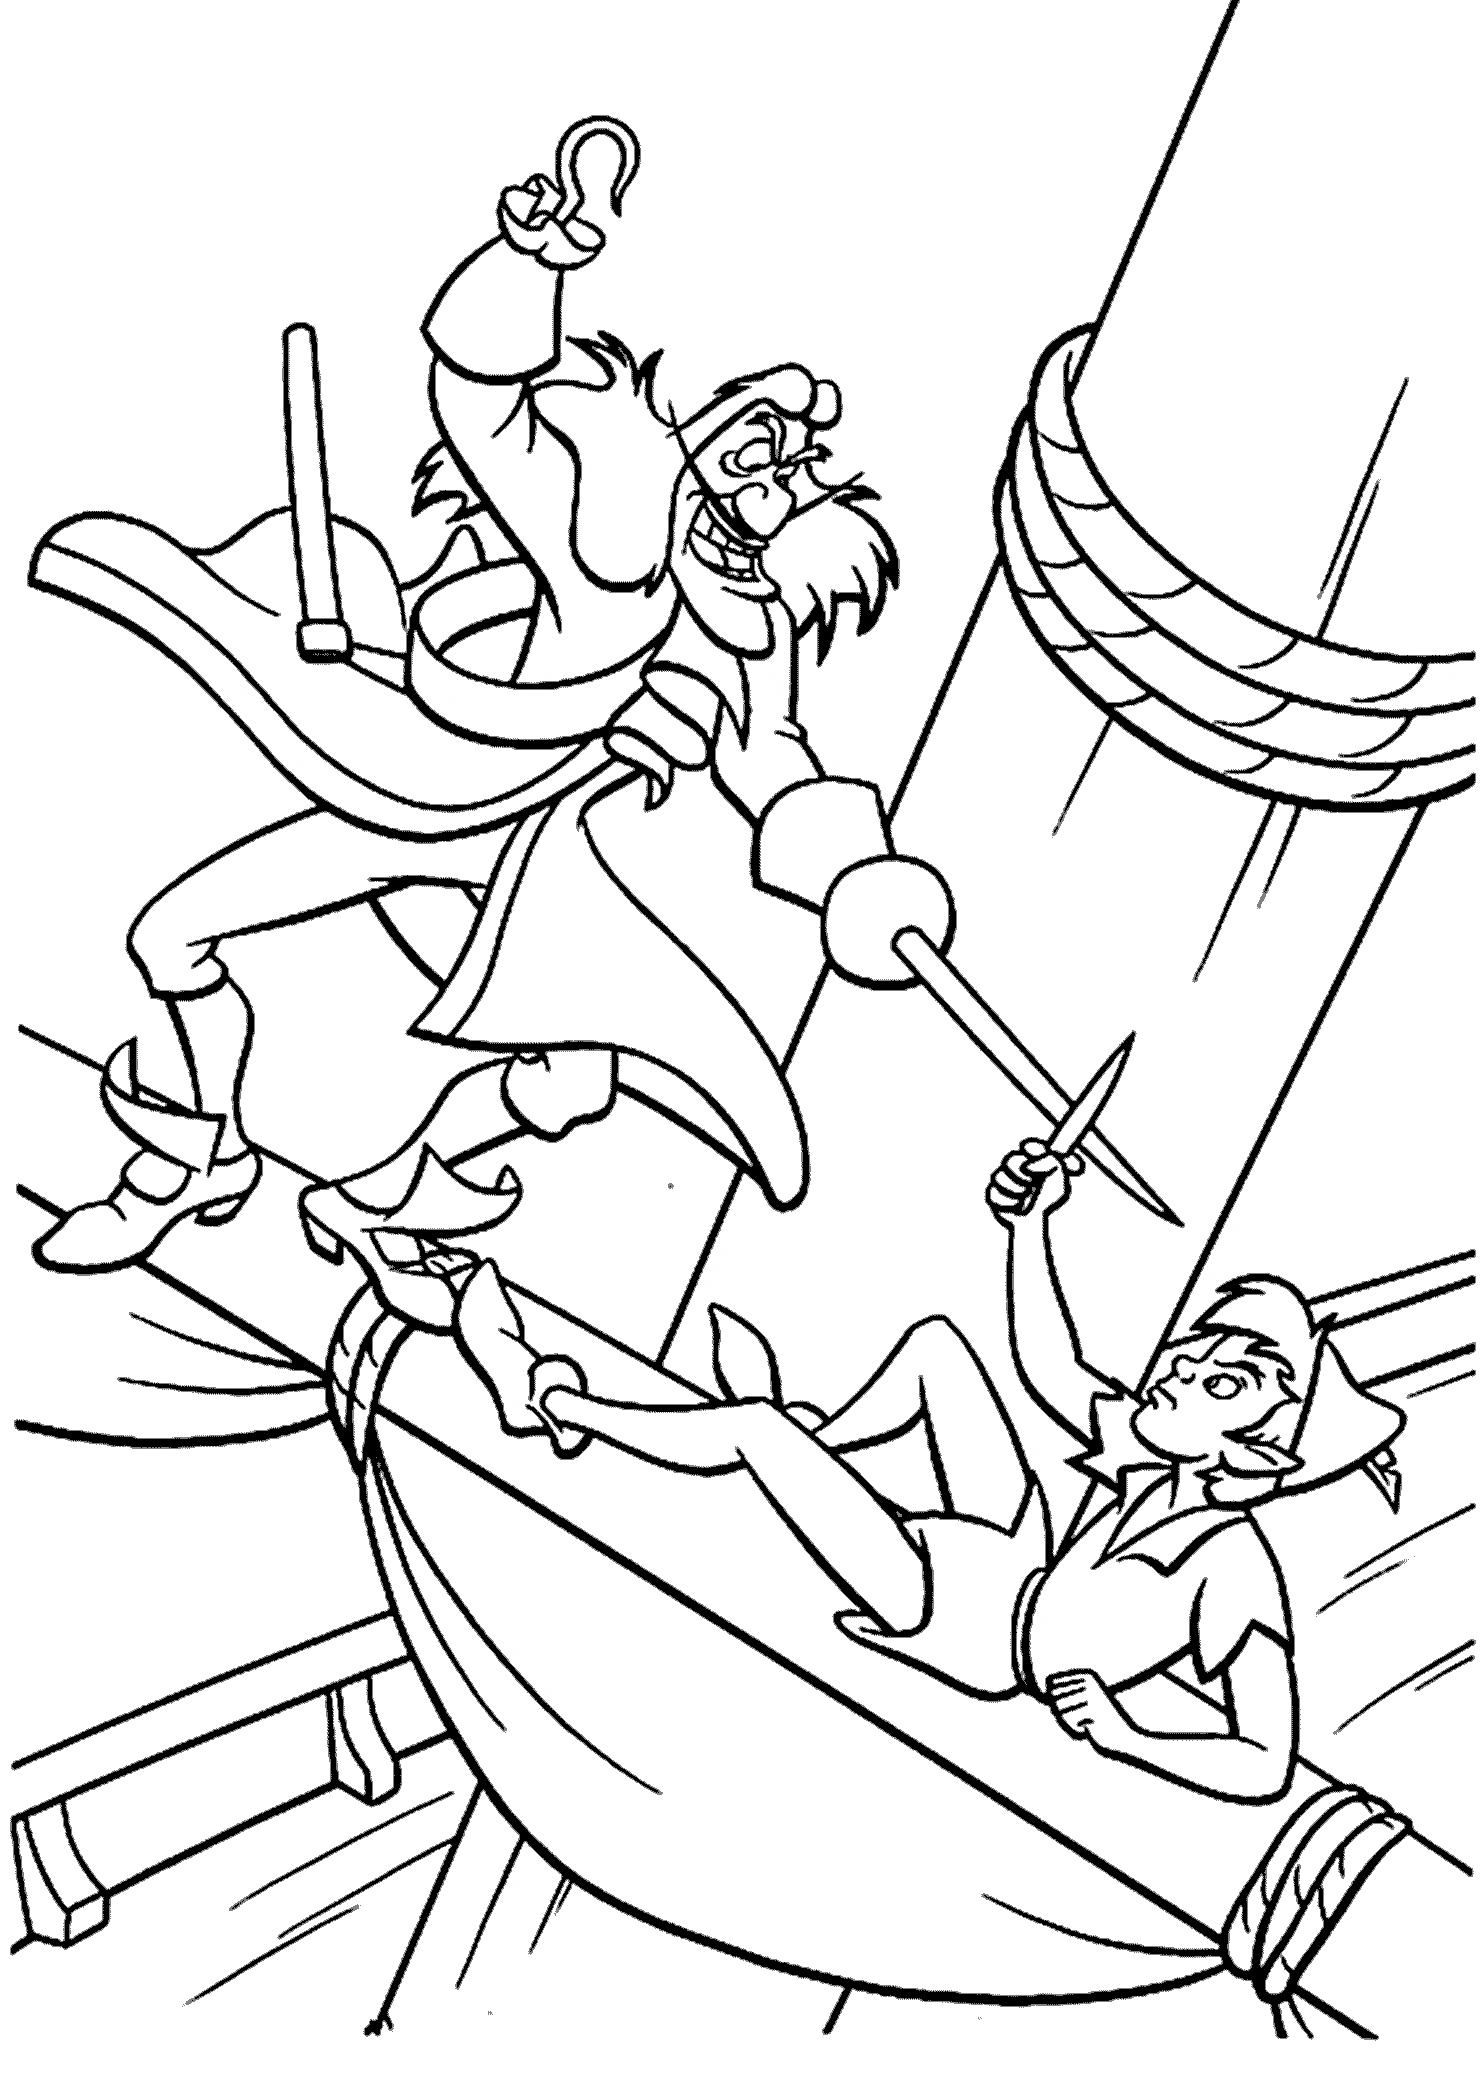 Peter pan and hook coloring pages for kids printable free tinkerbell coloring pages peter pan coloring pages disney coloring pages